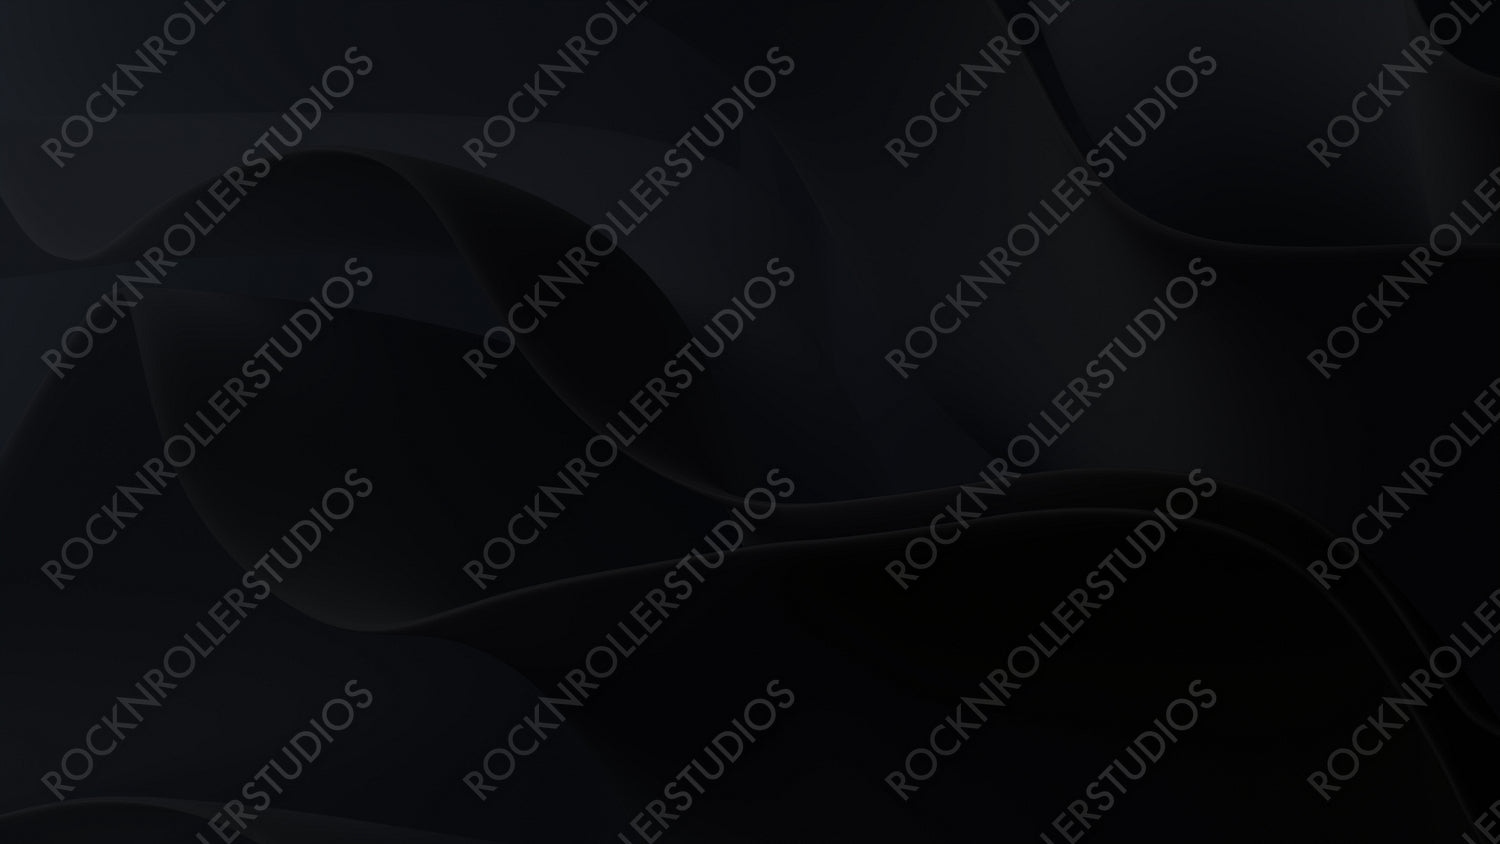 Black Wavy Surfaces. Trendy Abstract 3D Background. 3D Render.